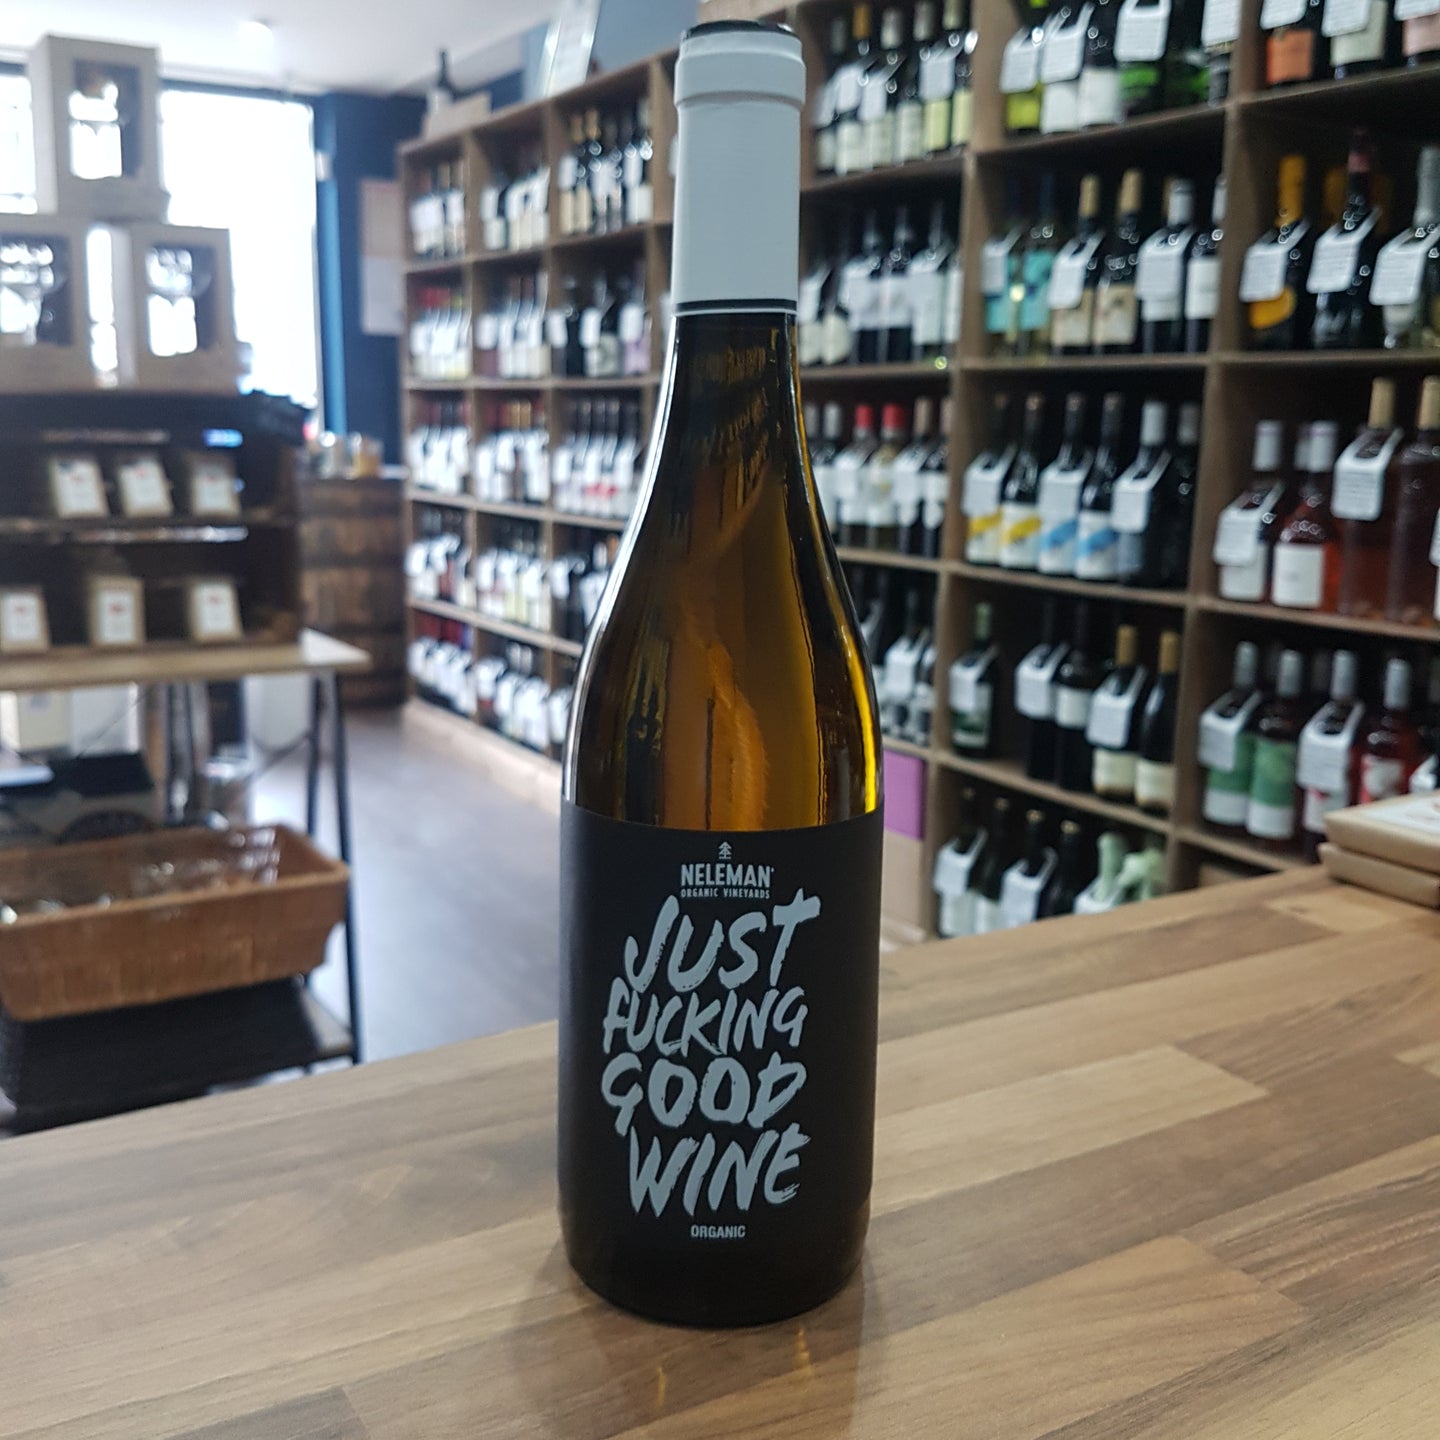 Just Fucking Good Wine Blanco/White Spain 75cl